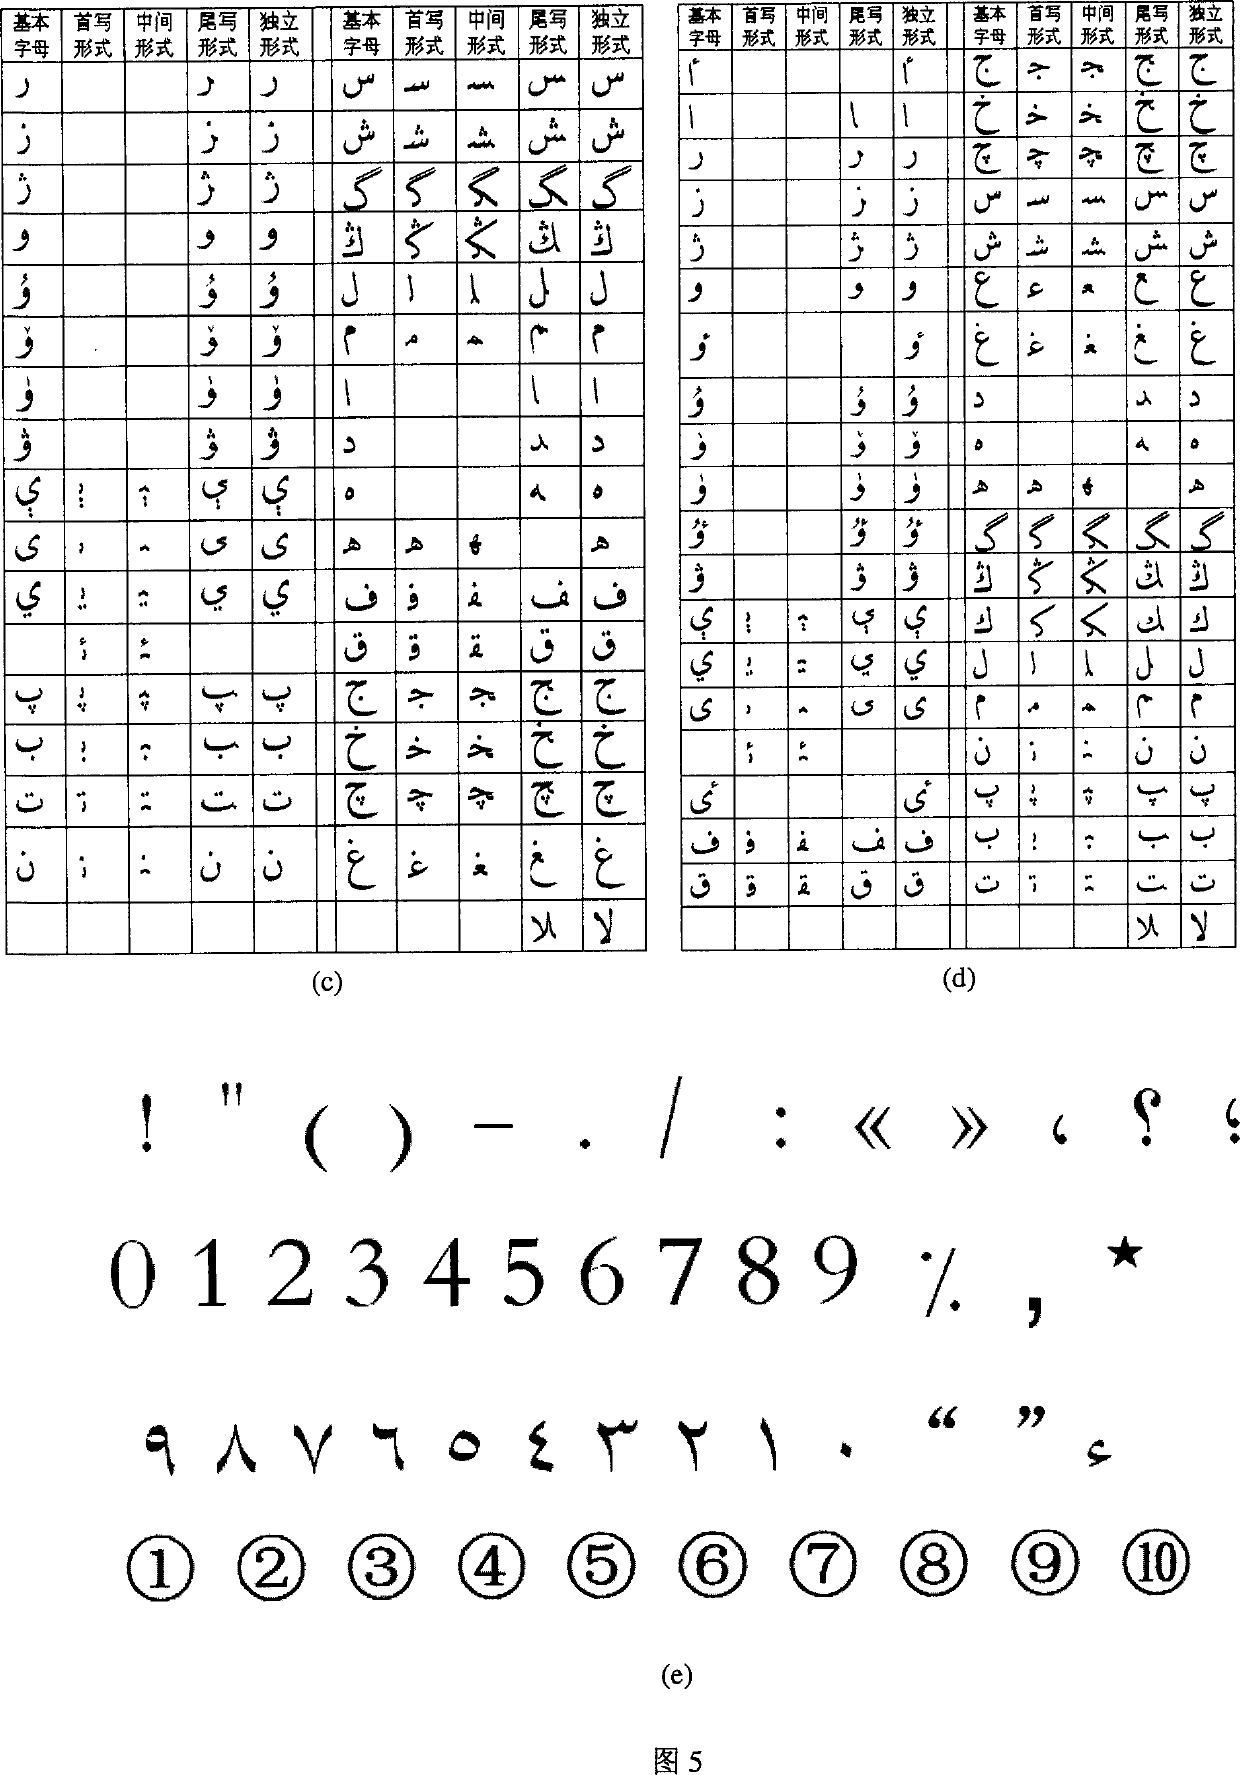 Printed font character identification method based on Arabic character set